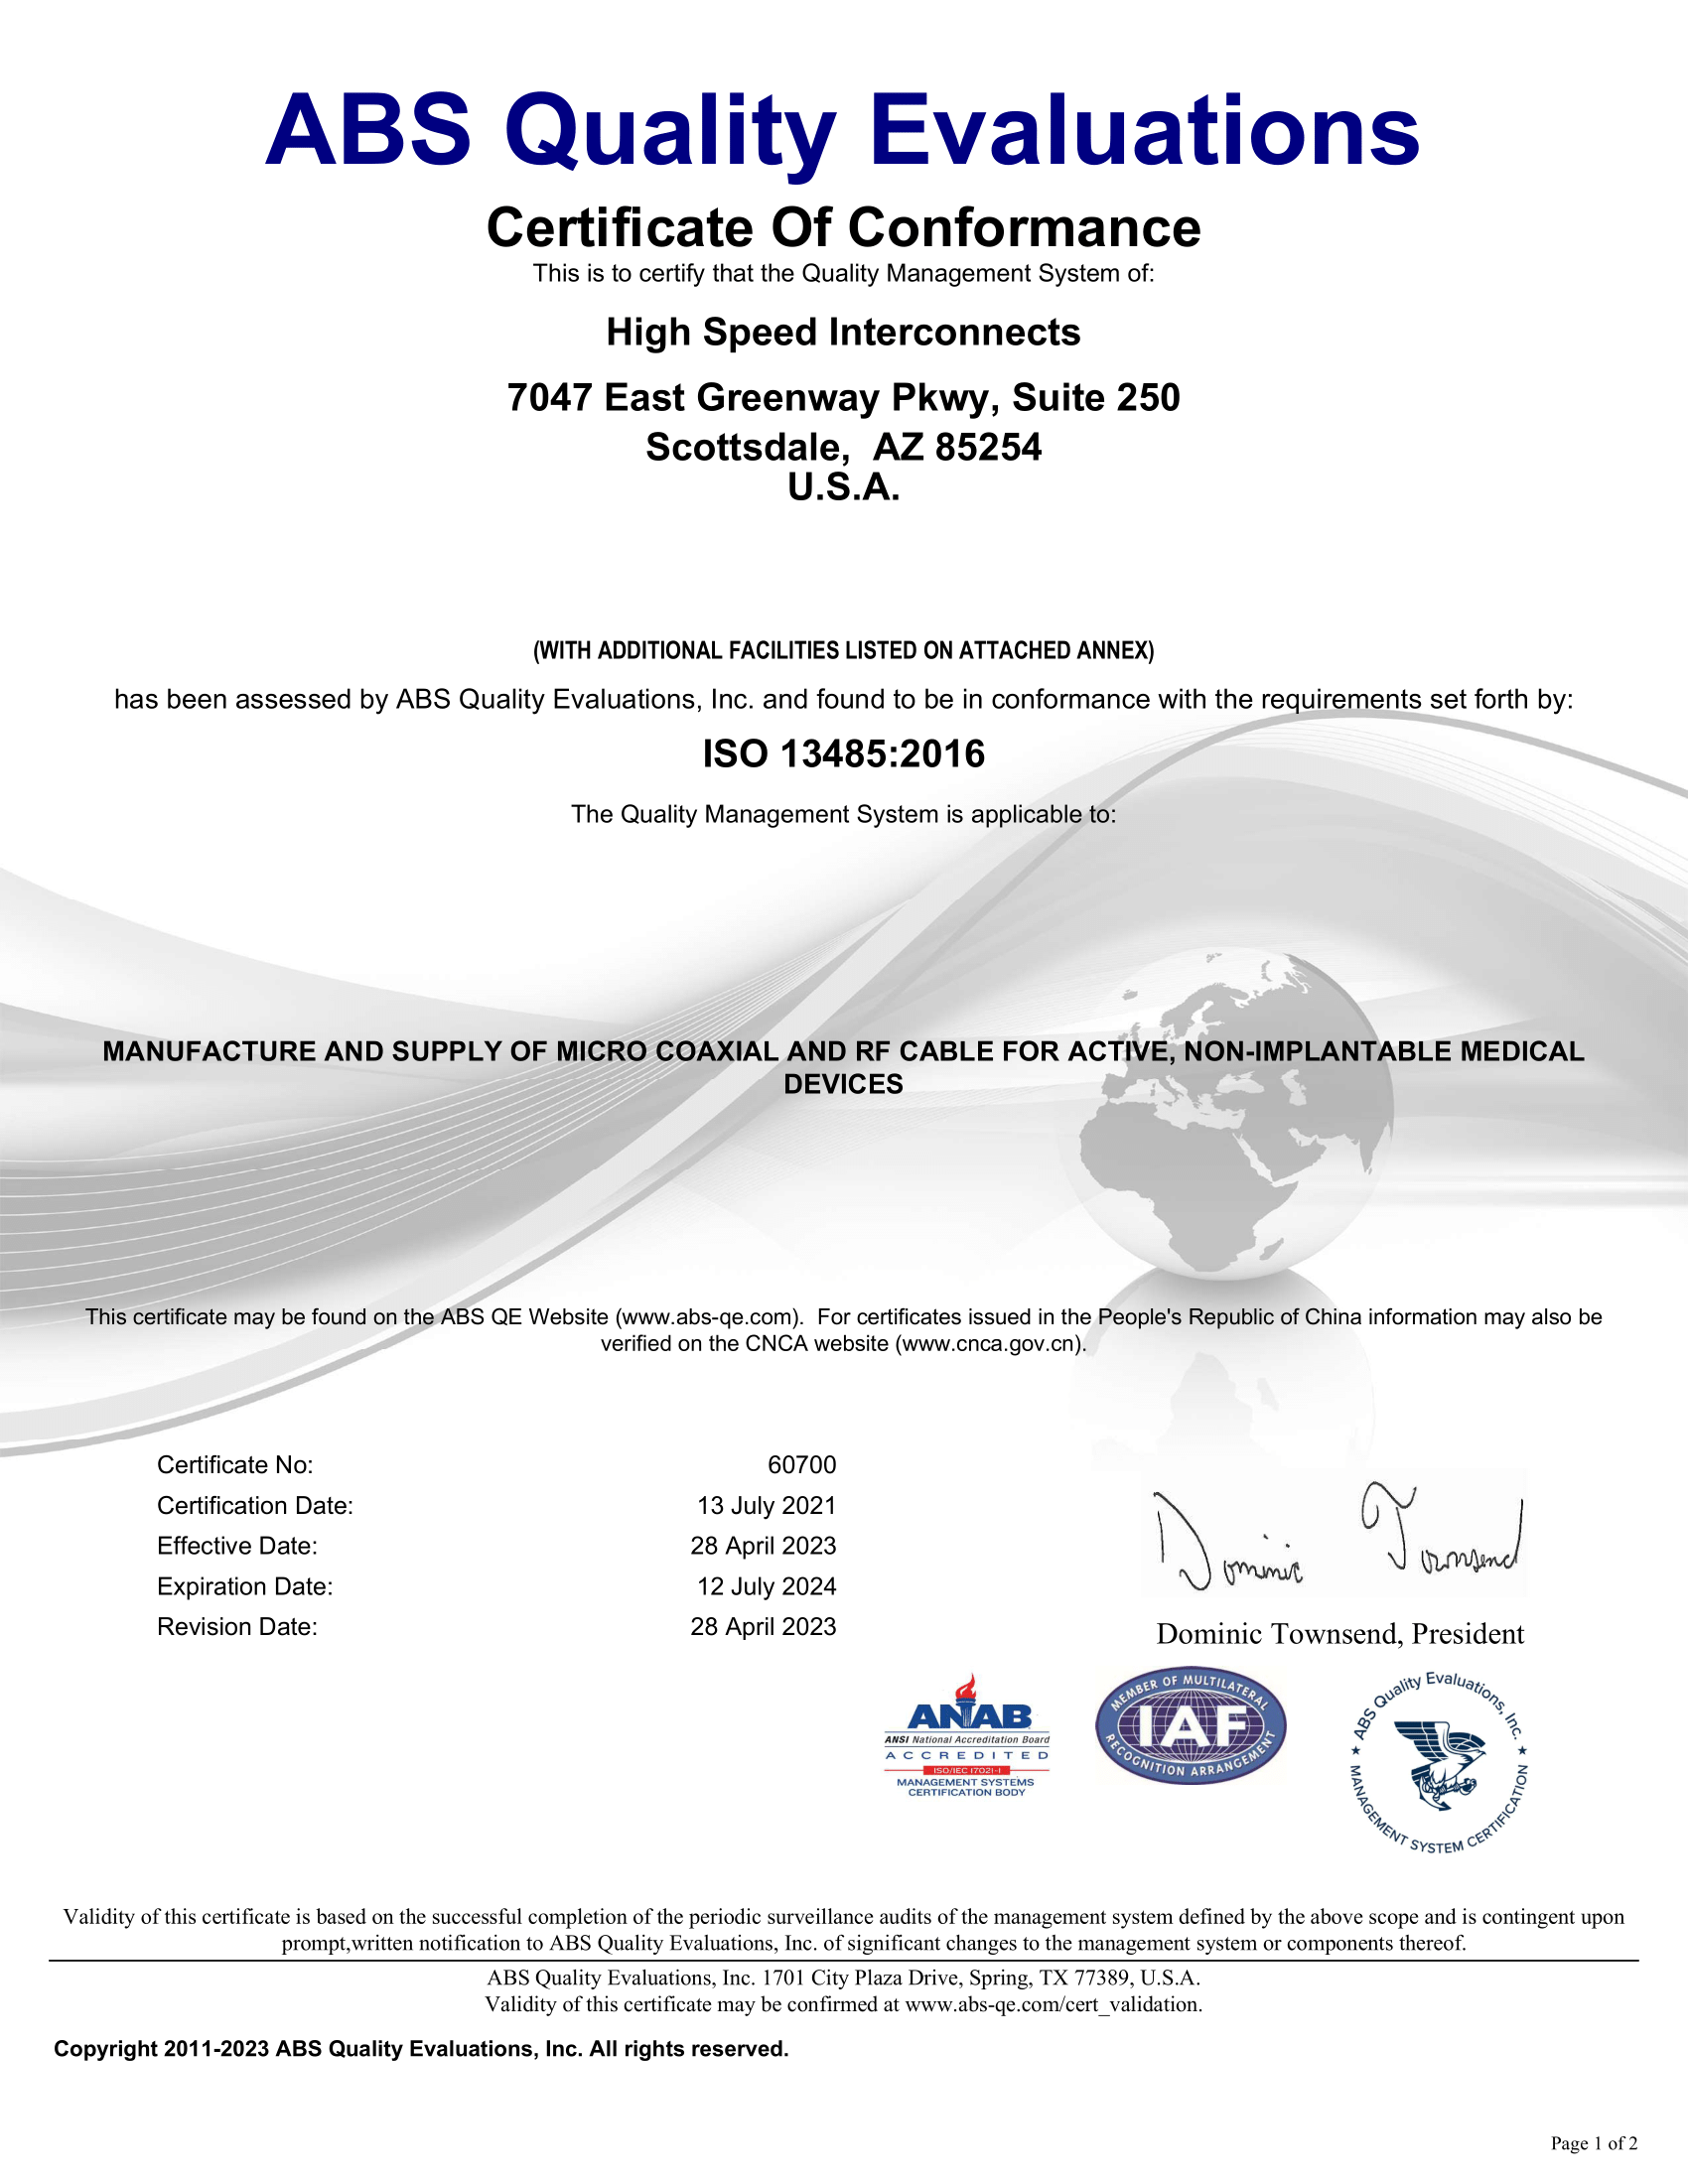 ISO13485 Certificate - High Speed Interconnects 2023-2024